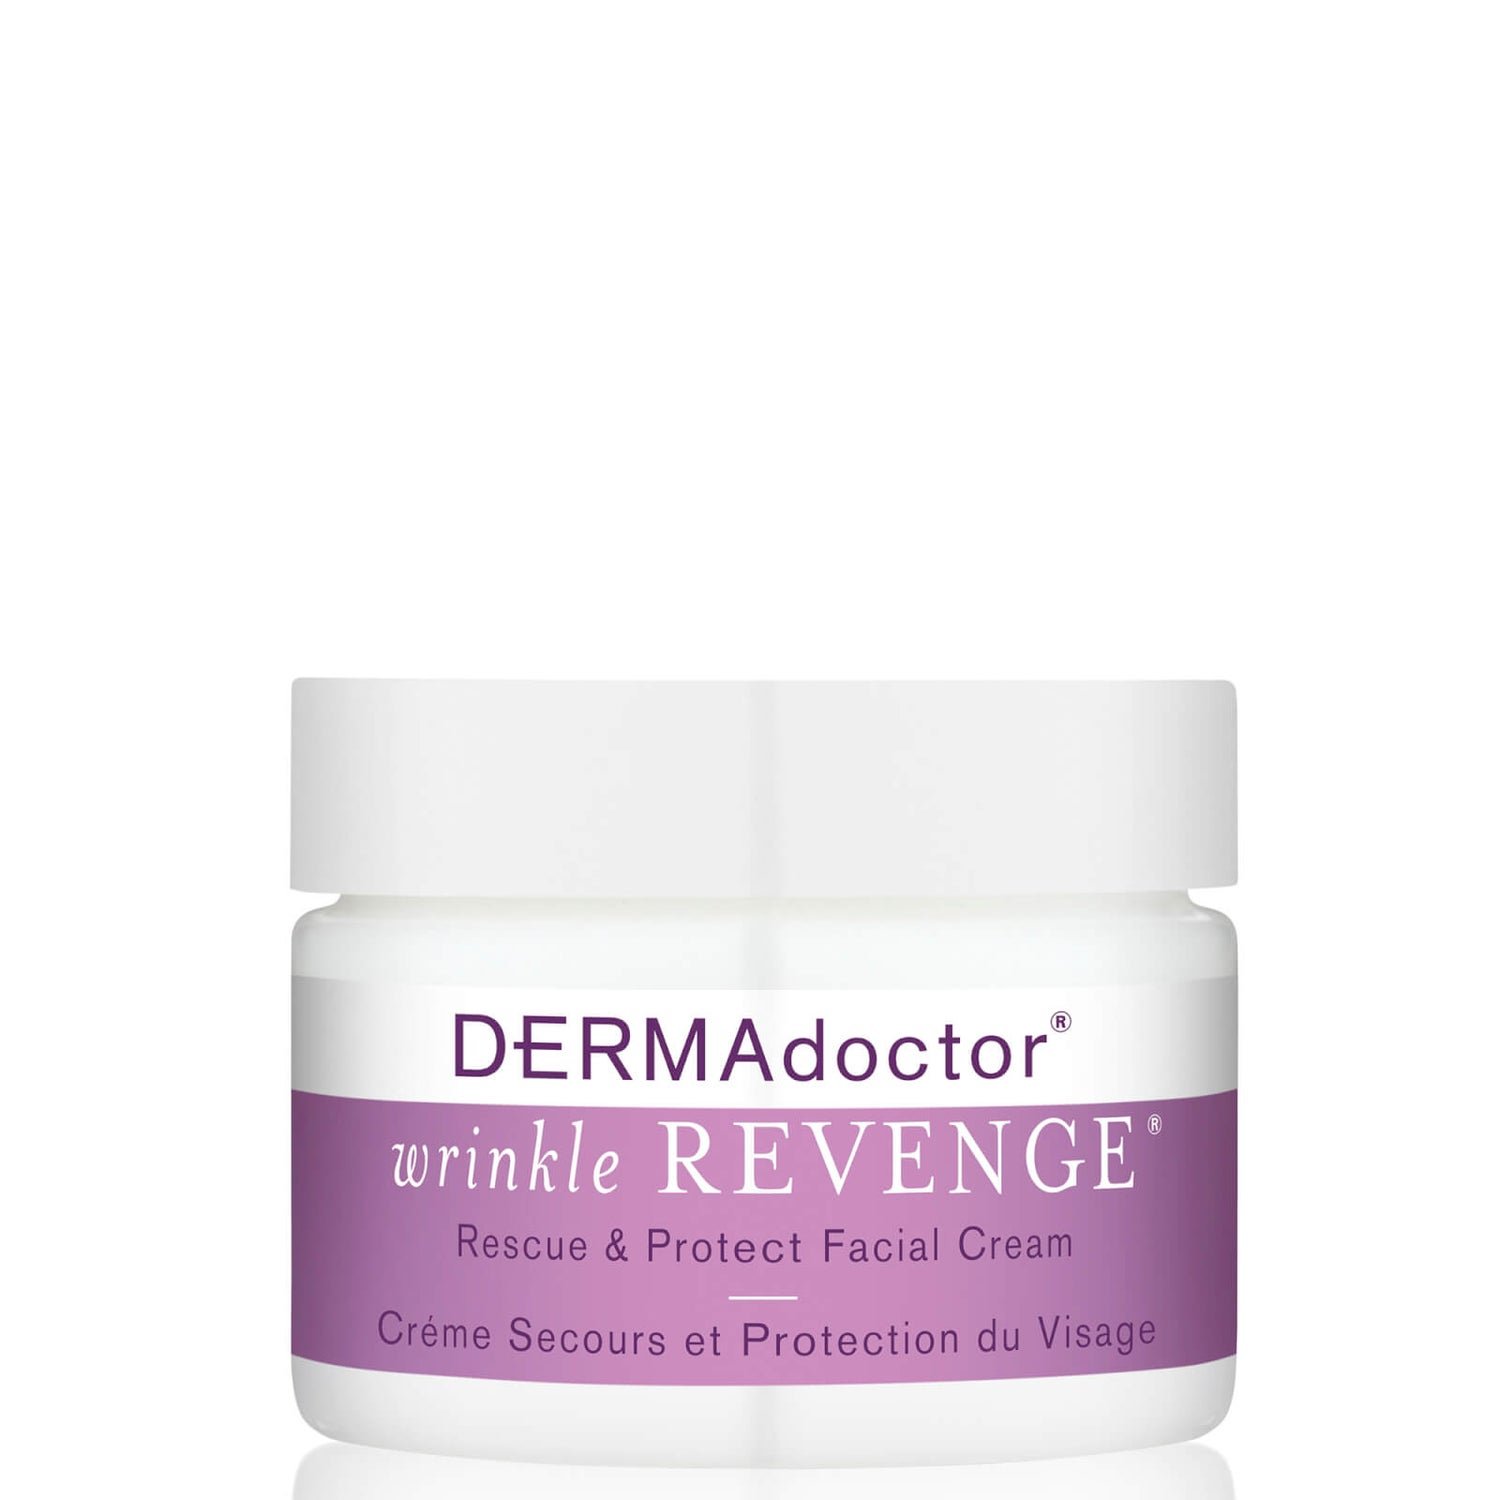 DERMAdoctor Wrinkle Revenge Rescue and Protect Facial Cream